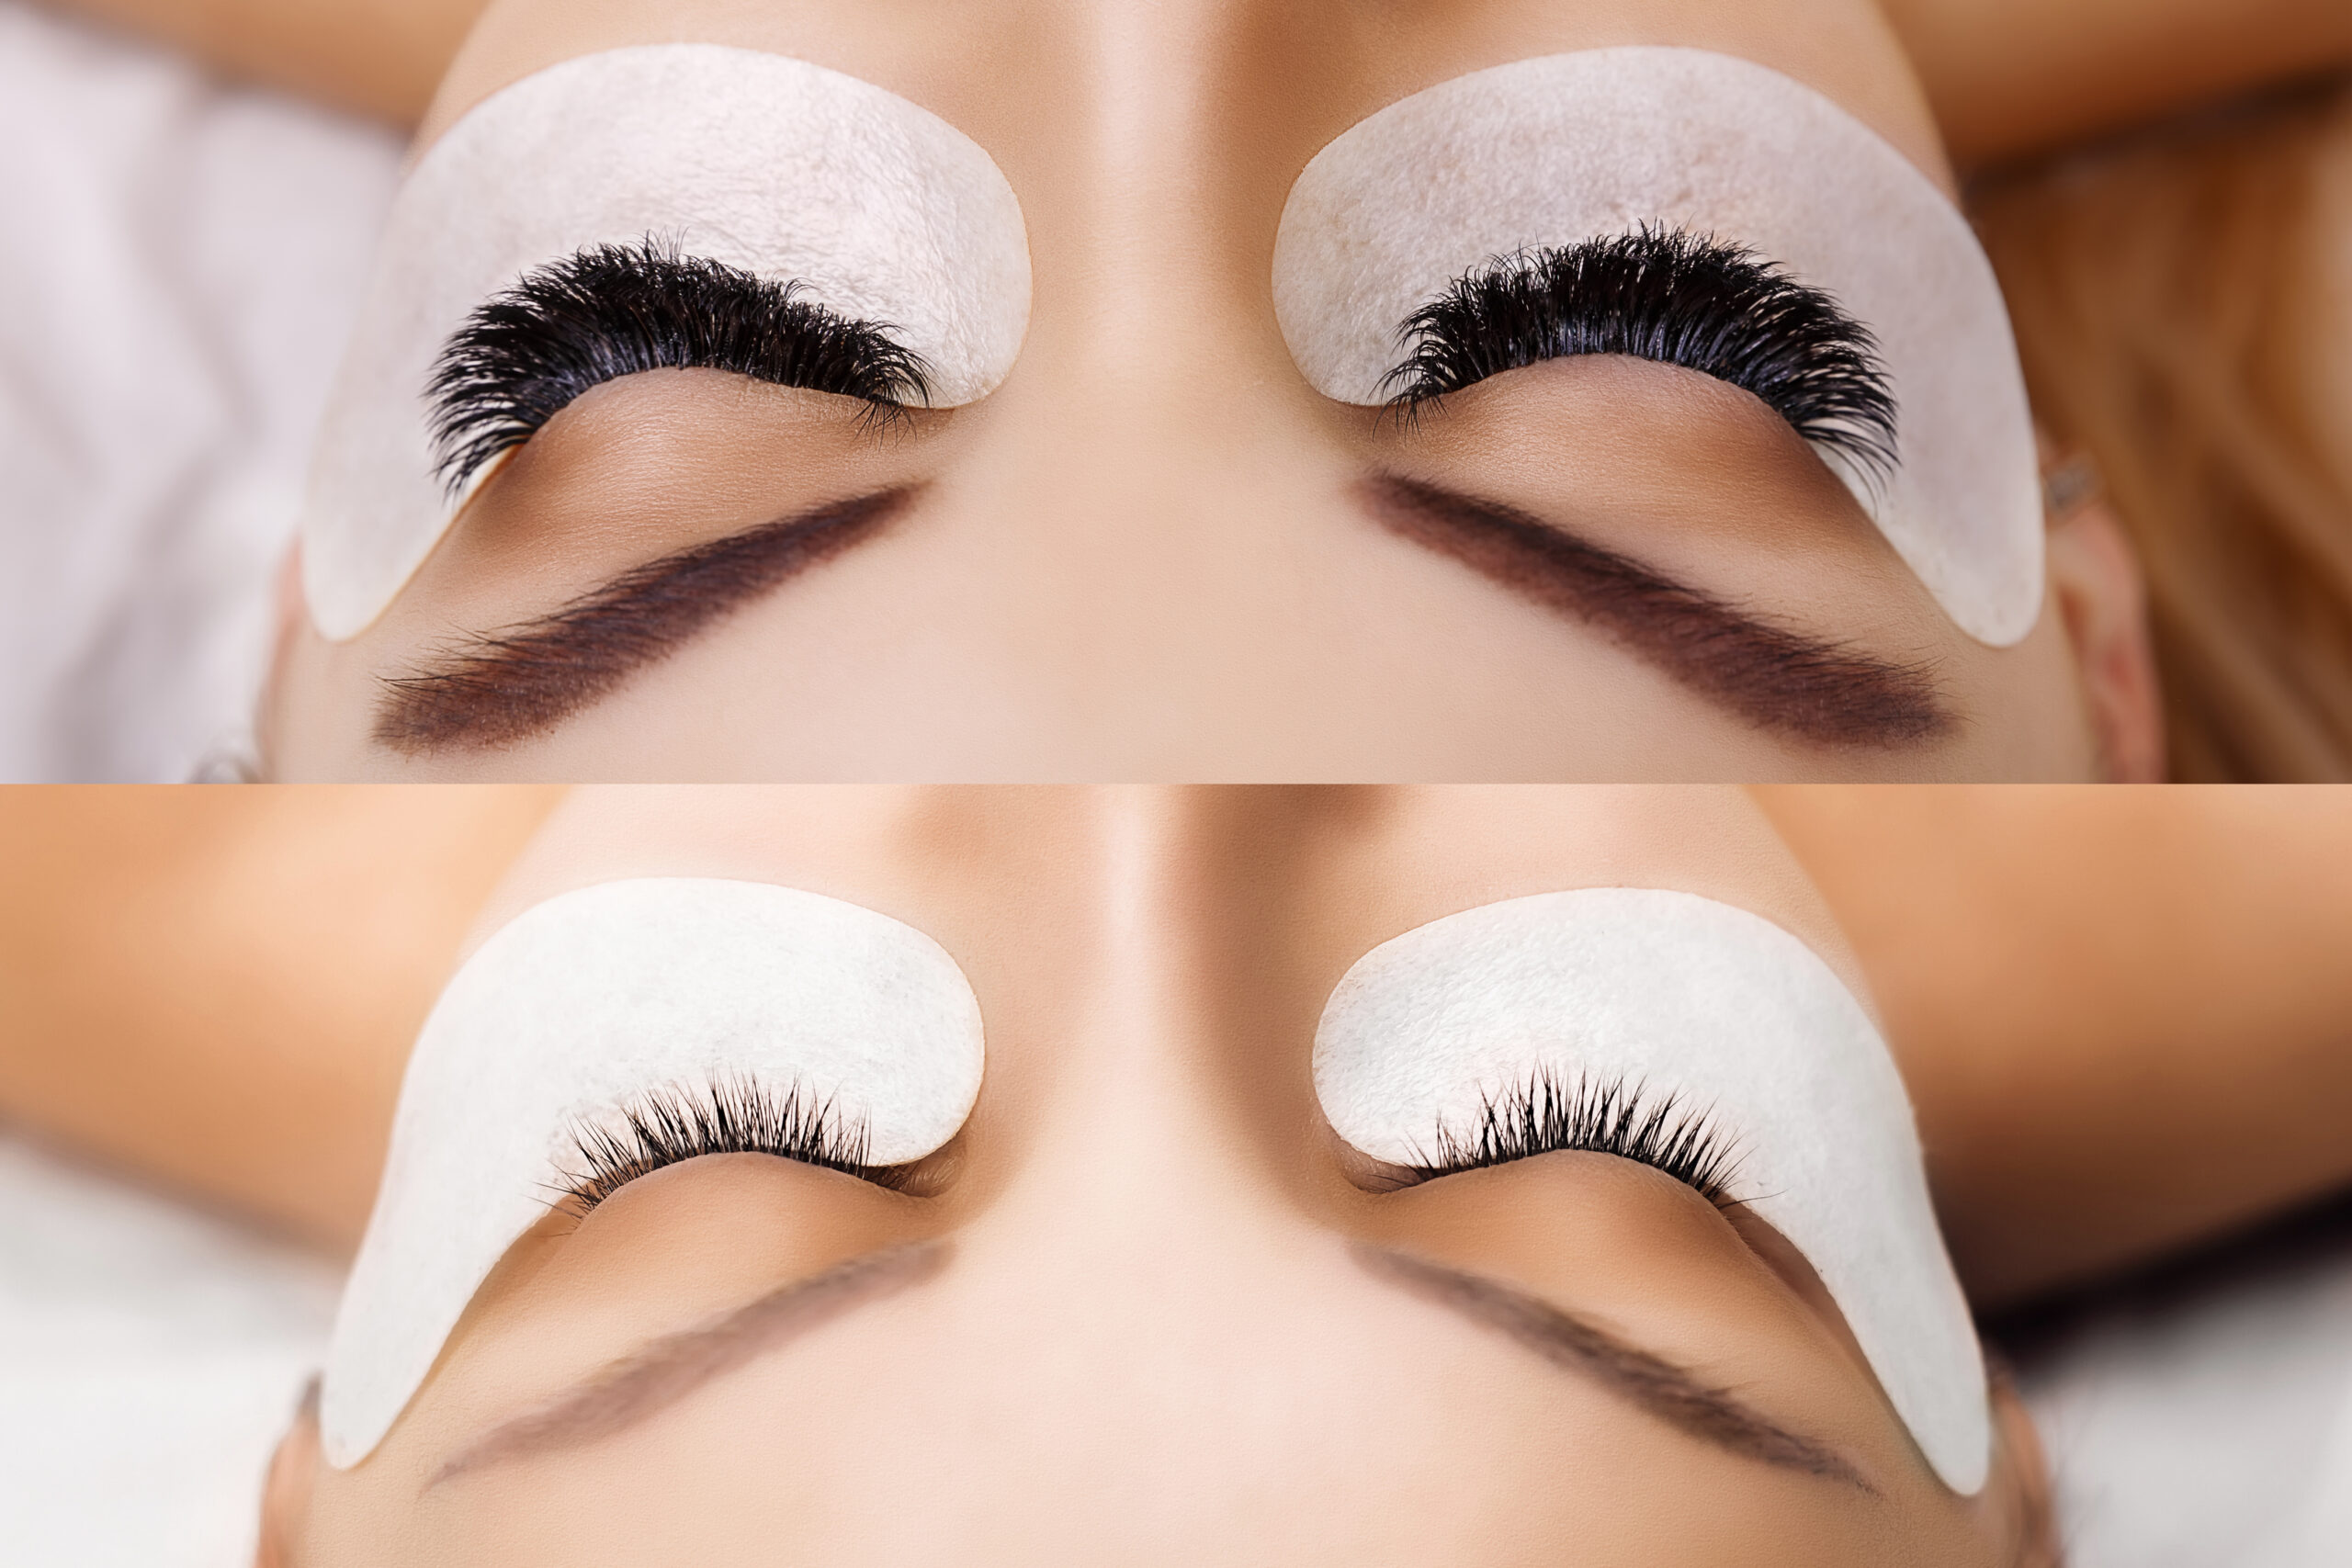 Comparison of female eyes before and after eyelash extension